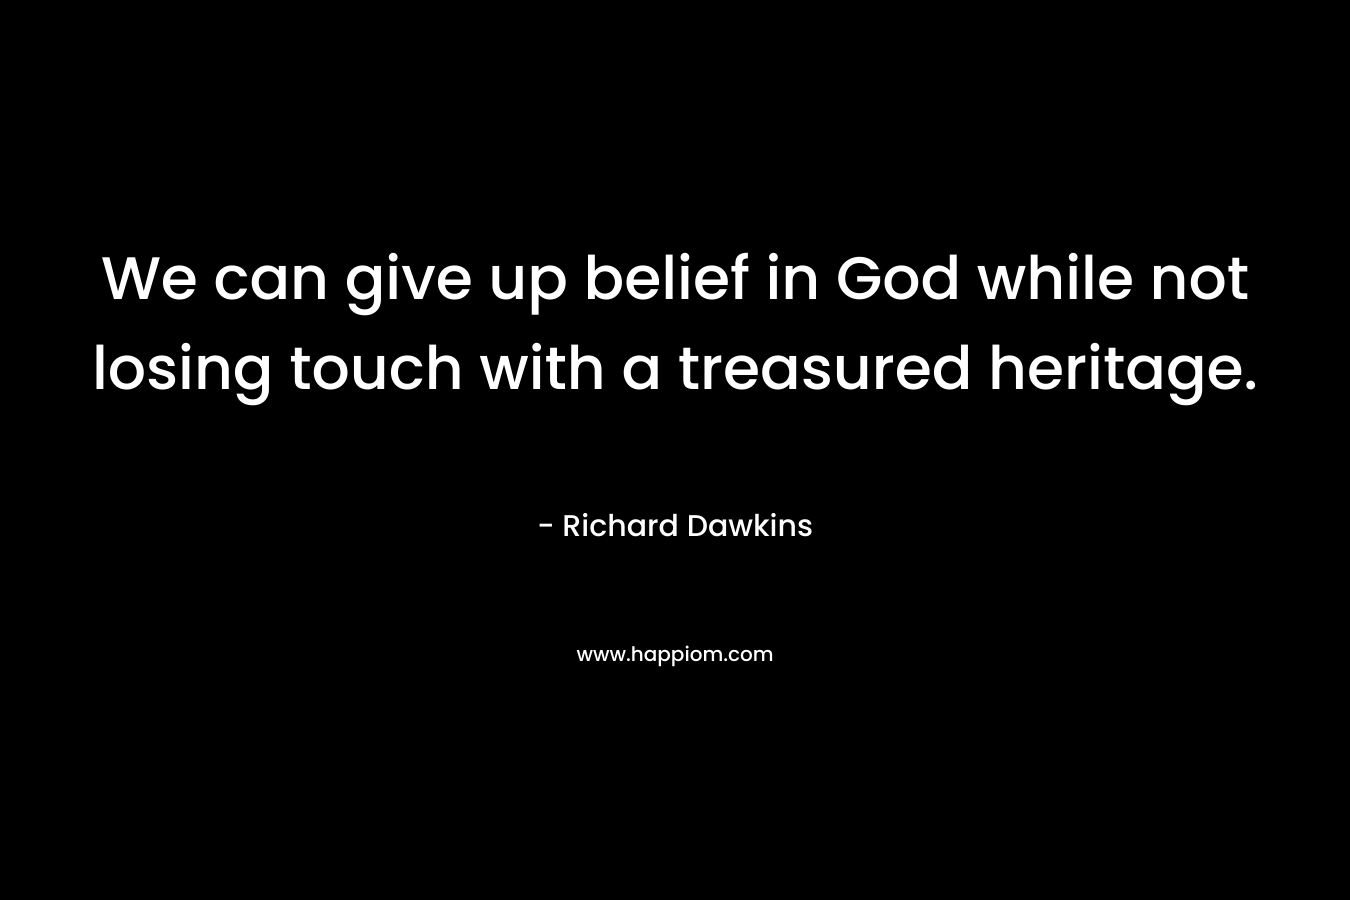 We can give up belief in God while not losing touch with a treasured heritage.